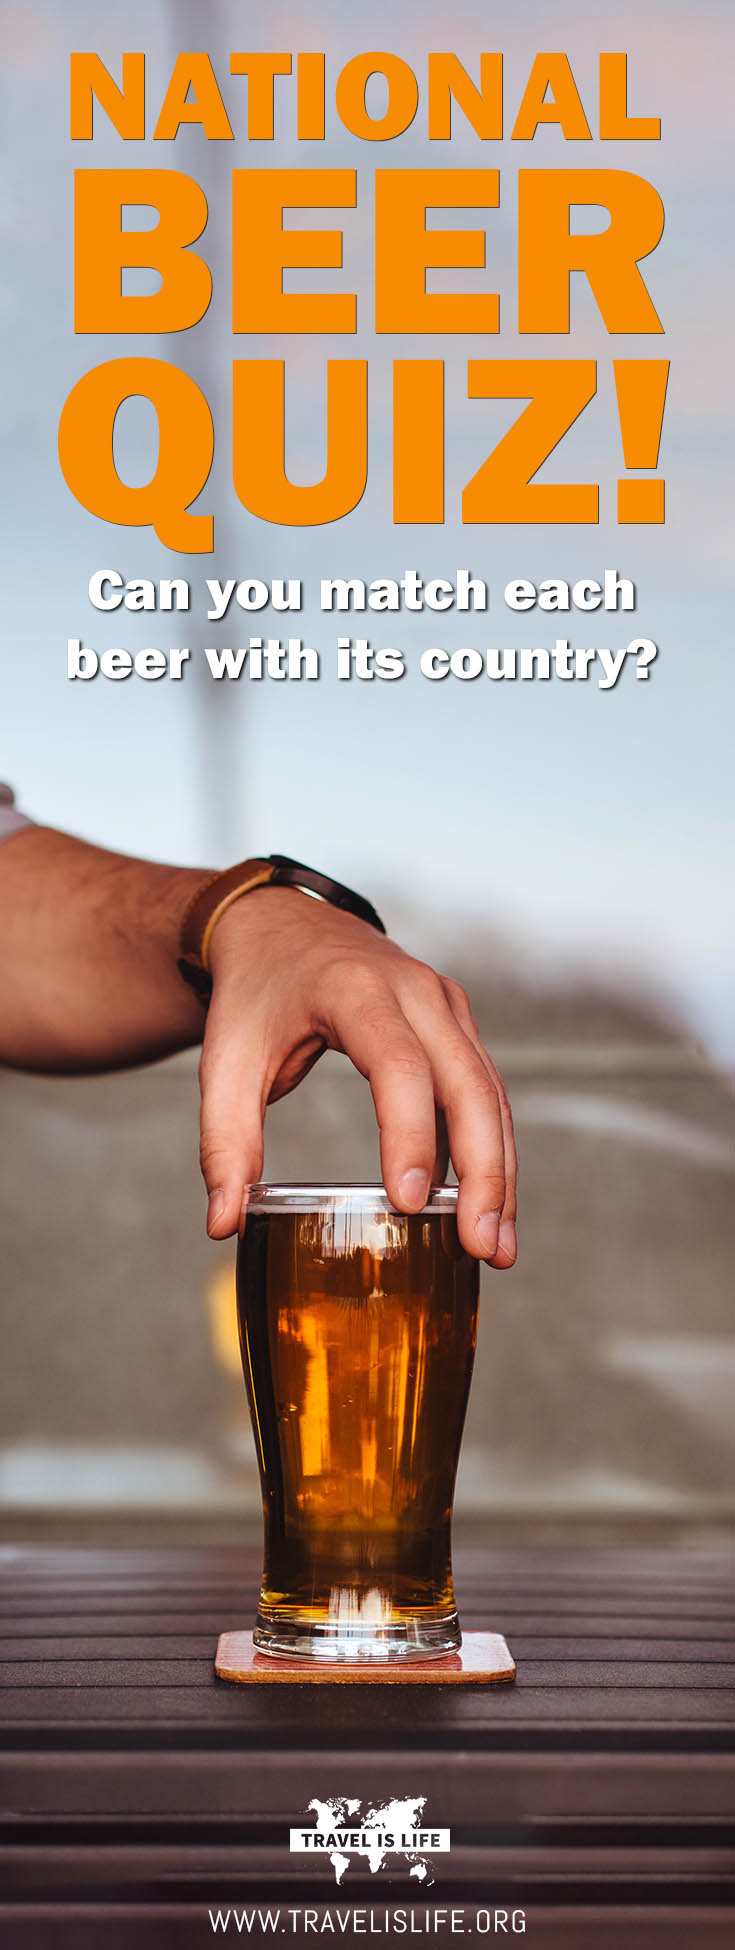 National Beers Quiz by Travel is Life